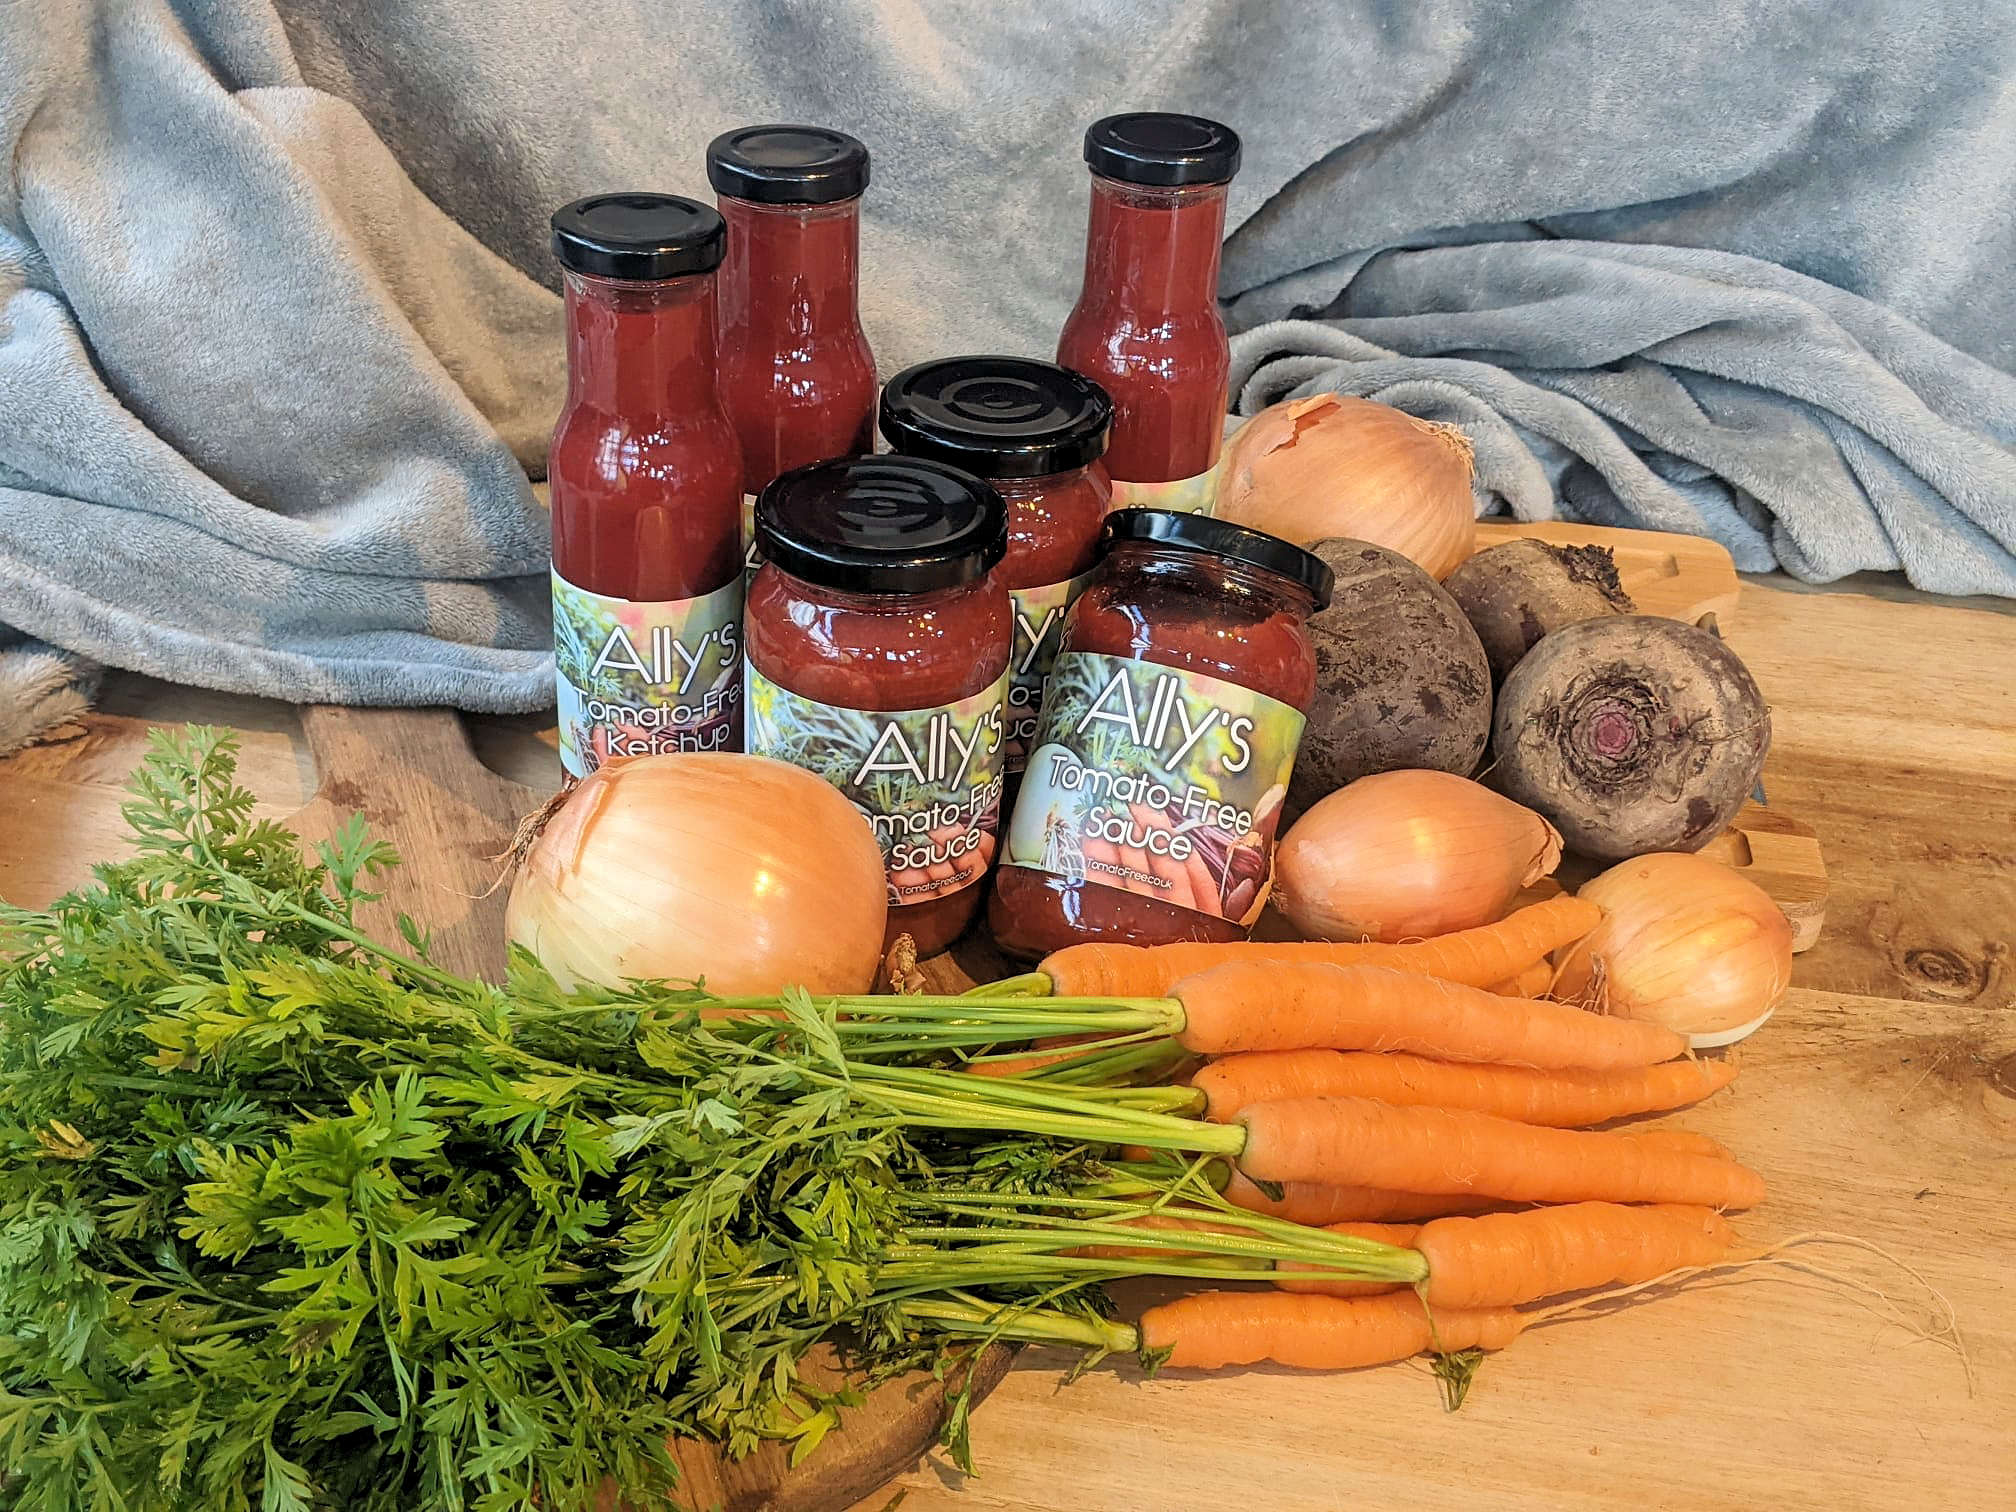 Wholesome and delicious tomato free sauces that look and taste just like tomato.